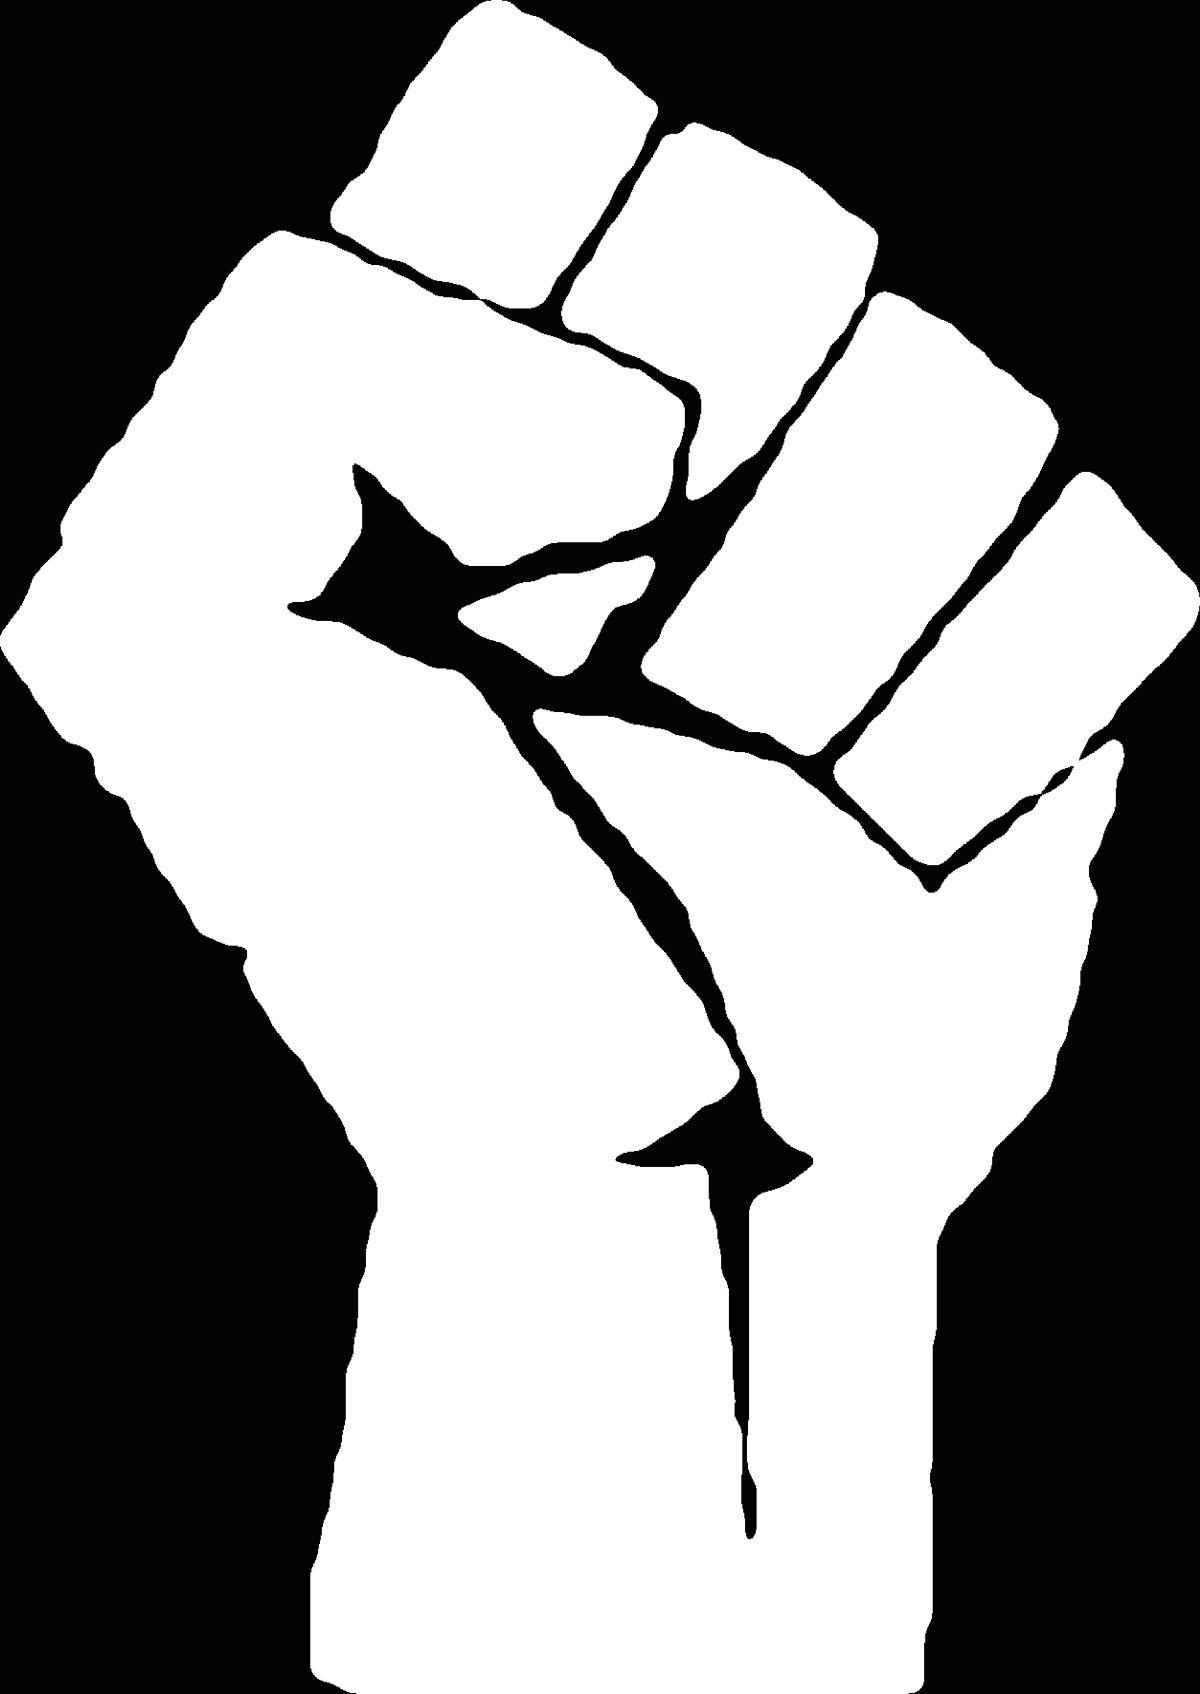 Racist_Aryan_Fist_or_White_Power_Fist_used_by_white_supremacists.svg.png